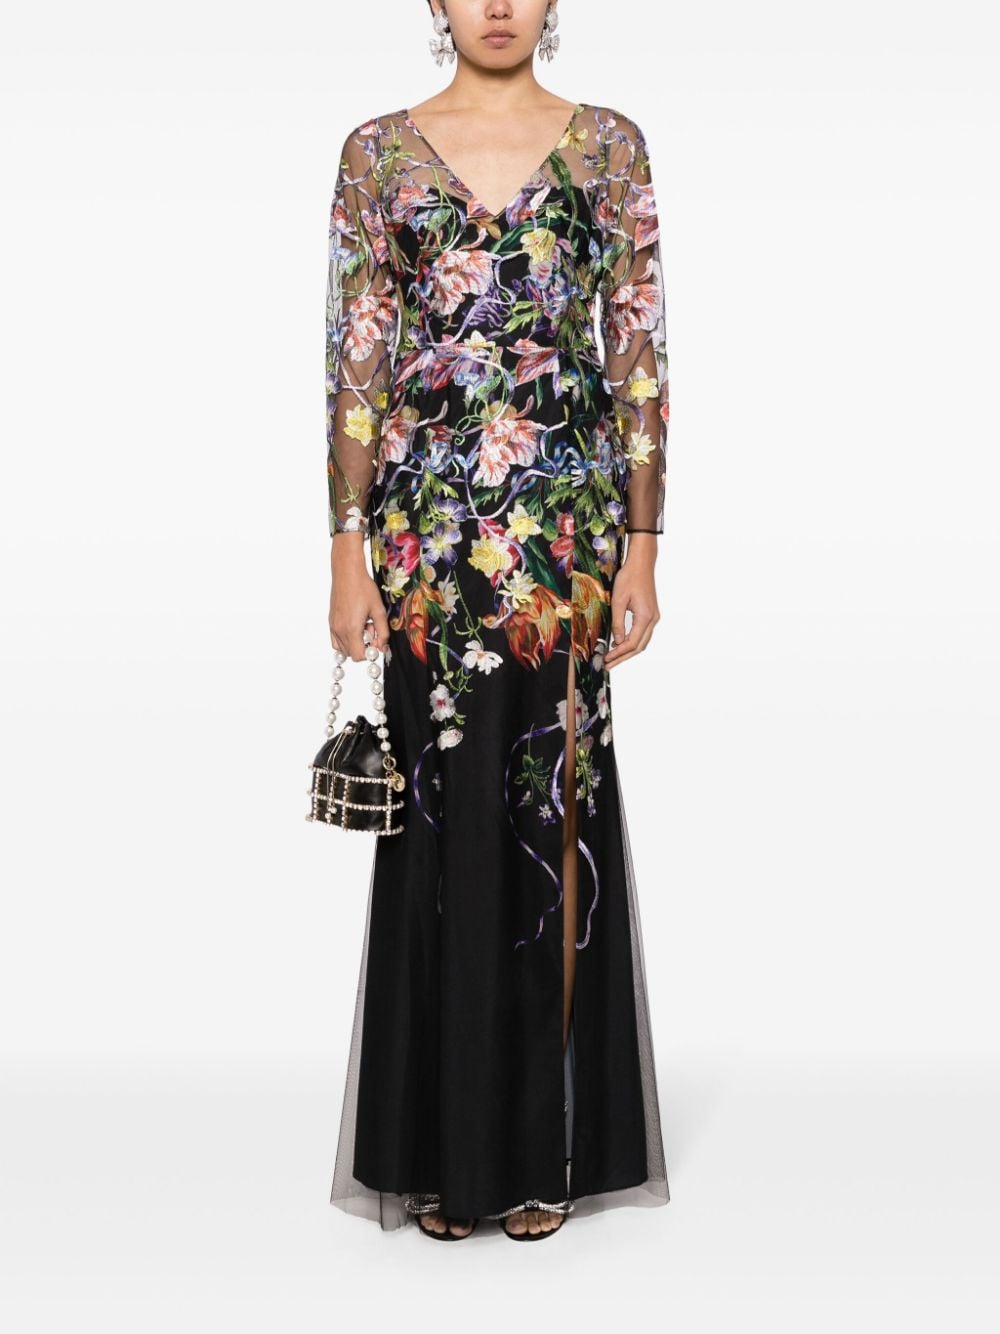 Marchesa Notte Ribbons floral-embroidered gown - BLACK MULTI